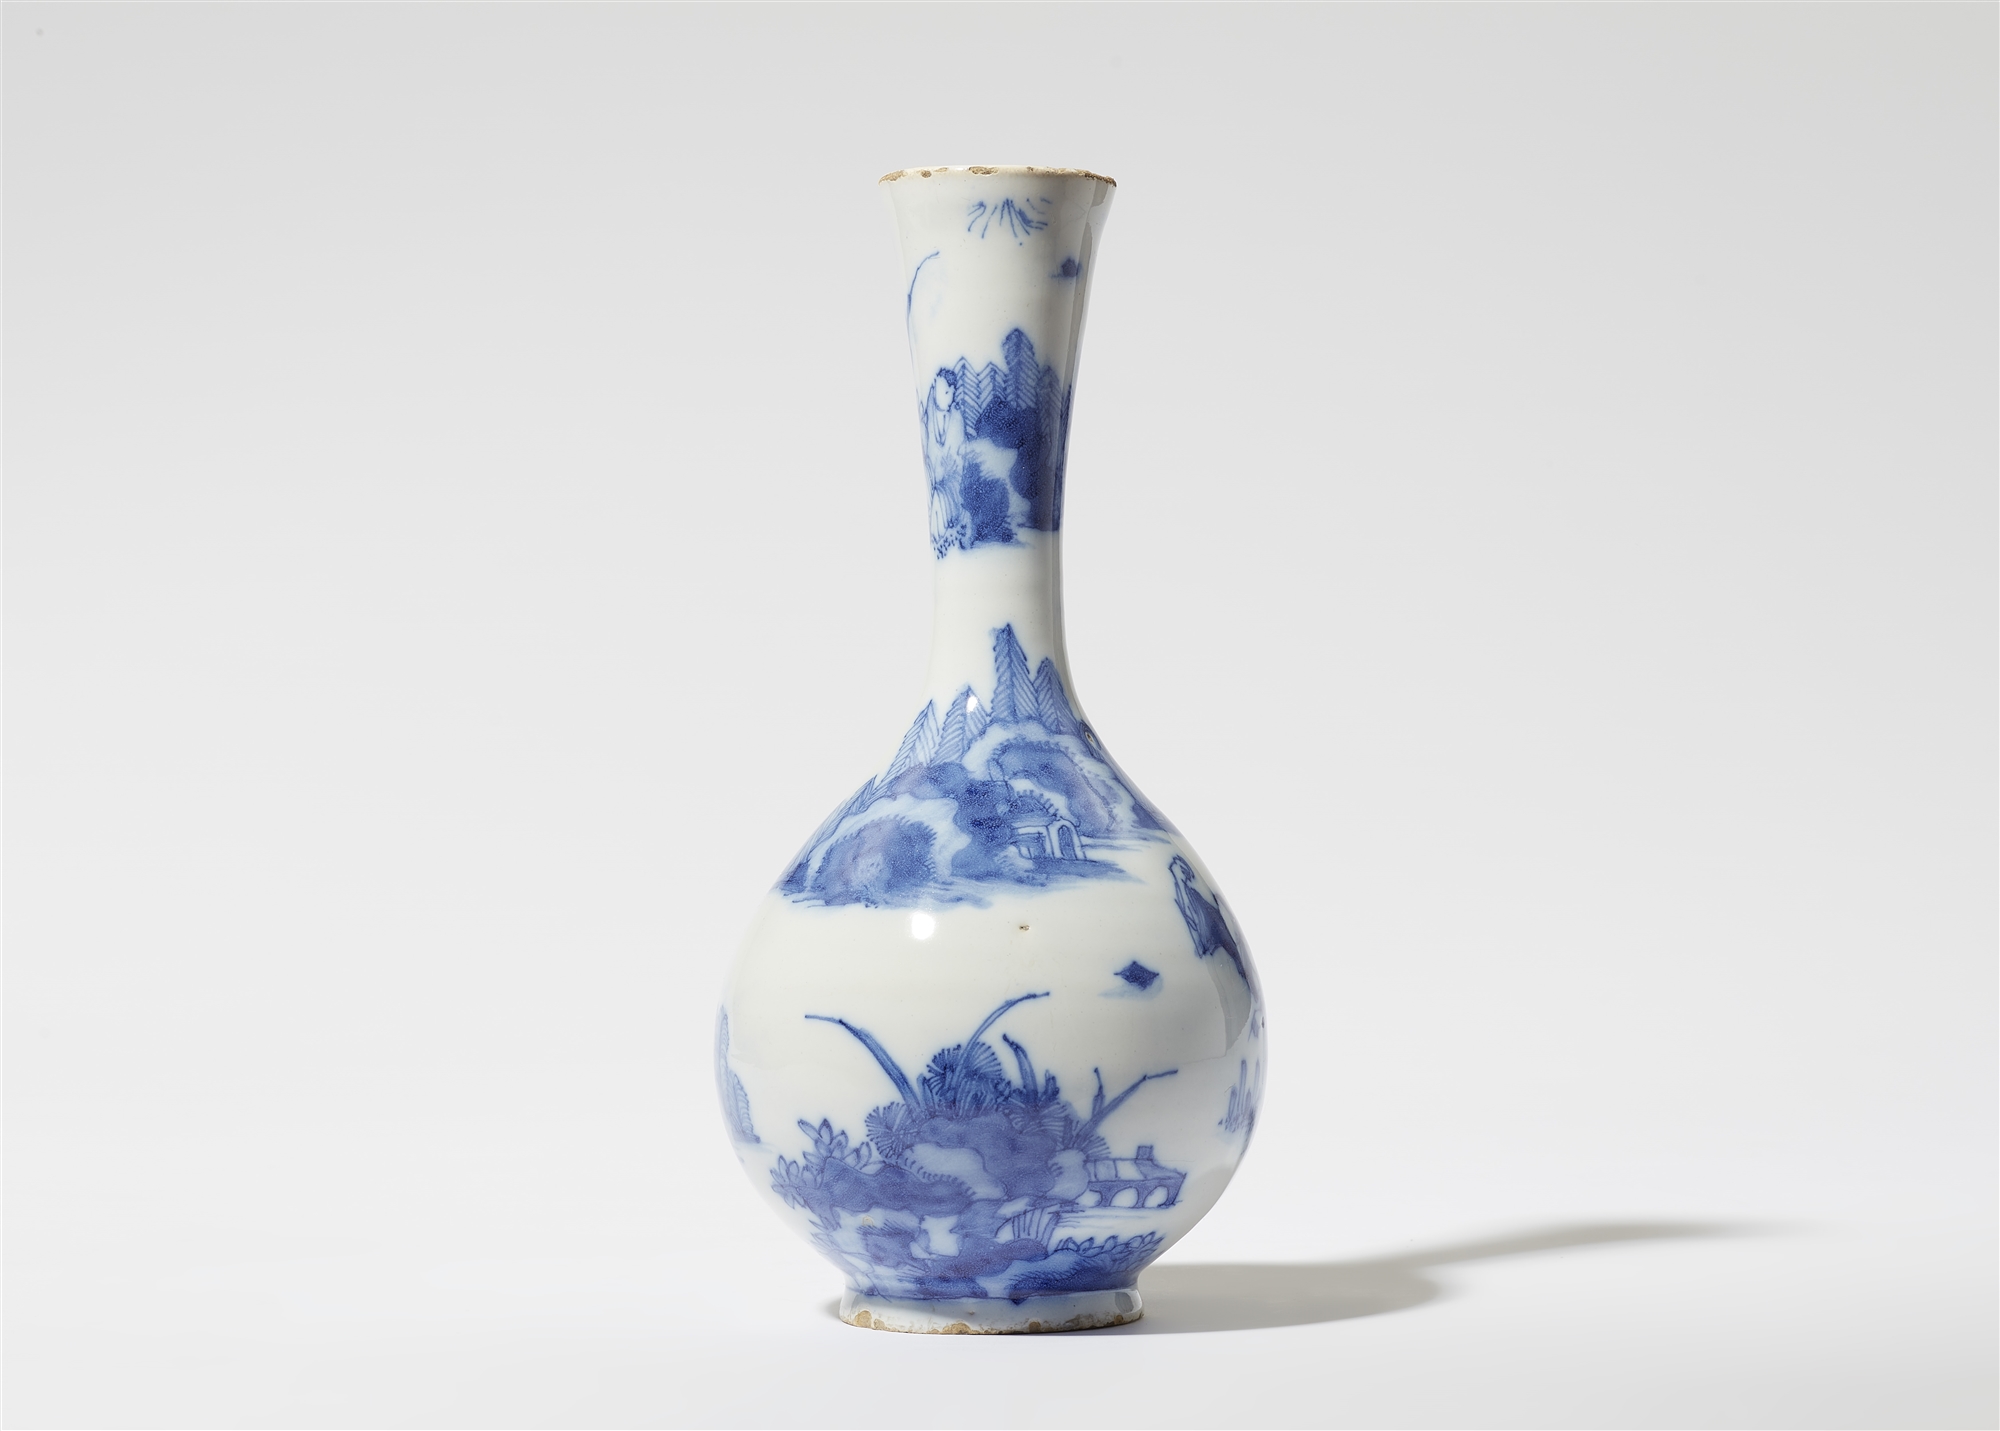 A small faience vase with Chinoiserie decor